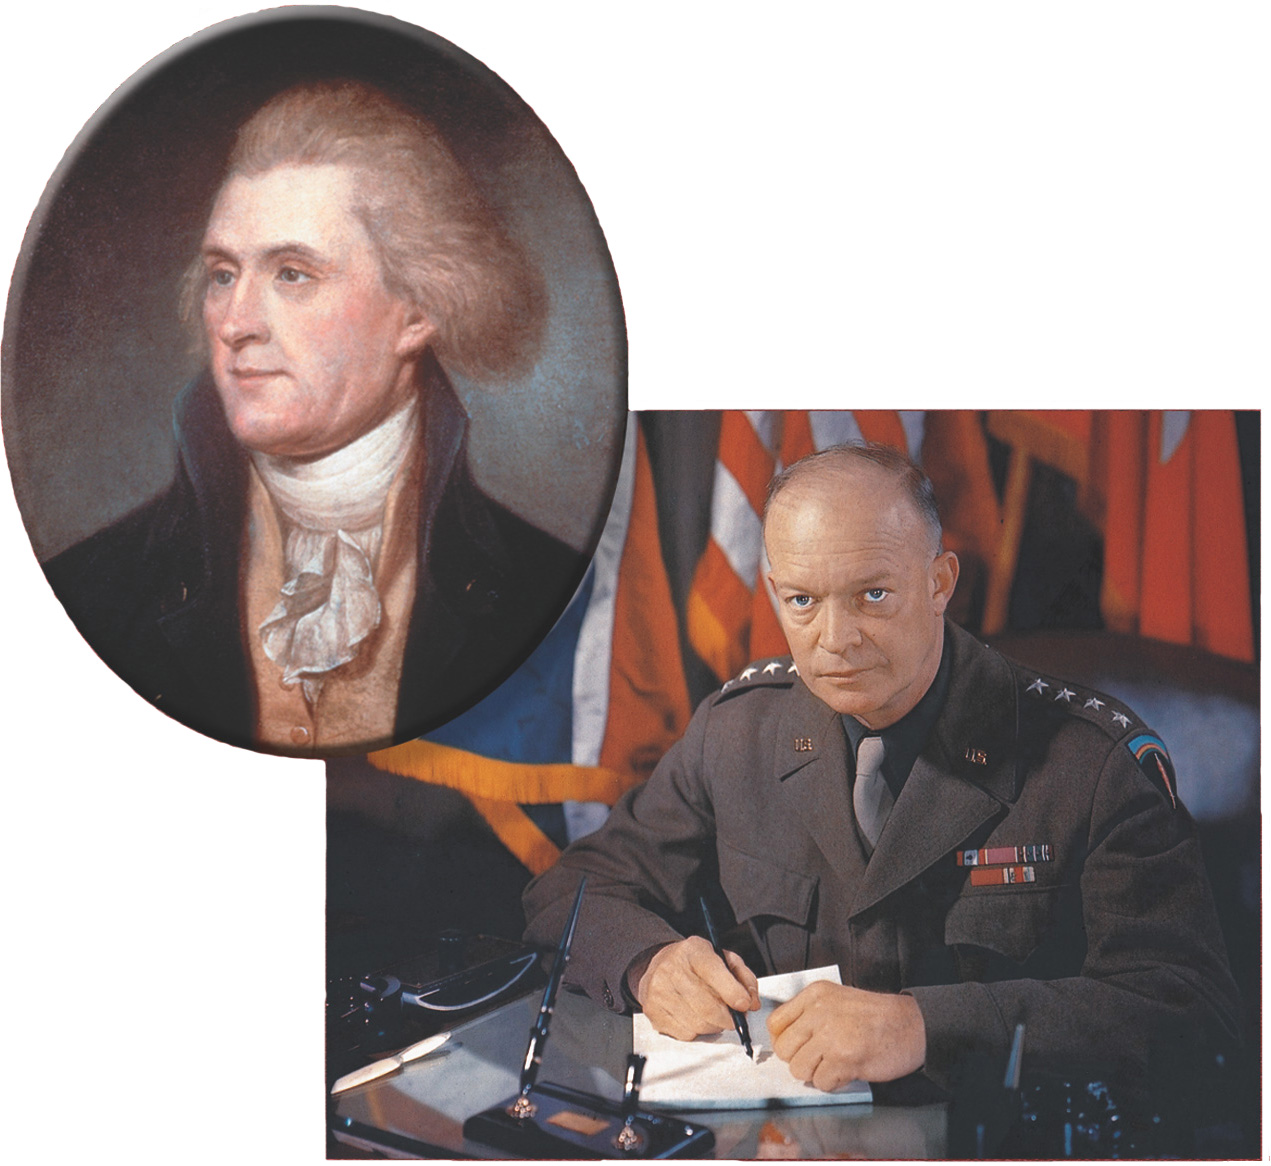 Portrait of Thomas Jefferson and photo of Dwight D Eisenhower.